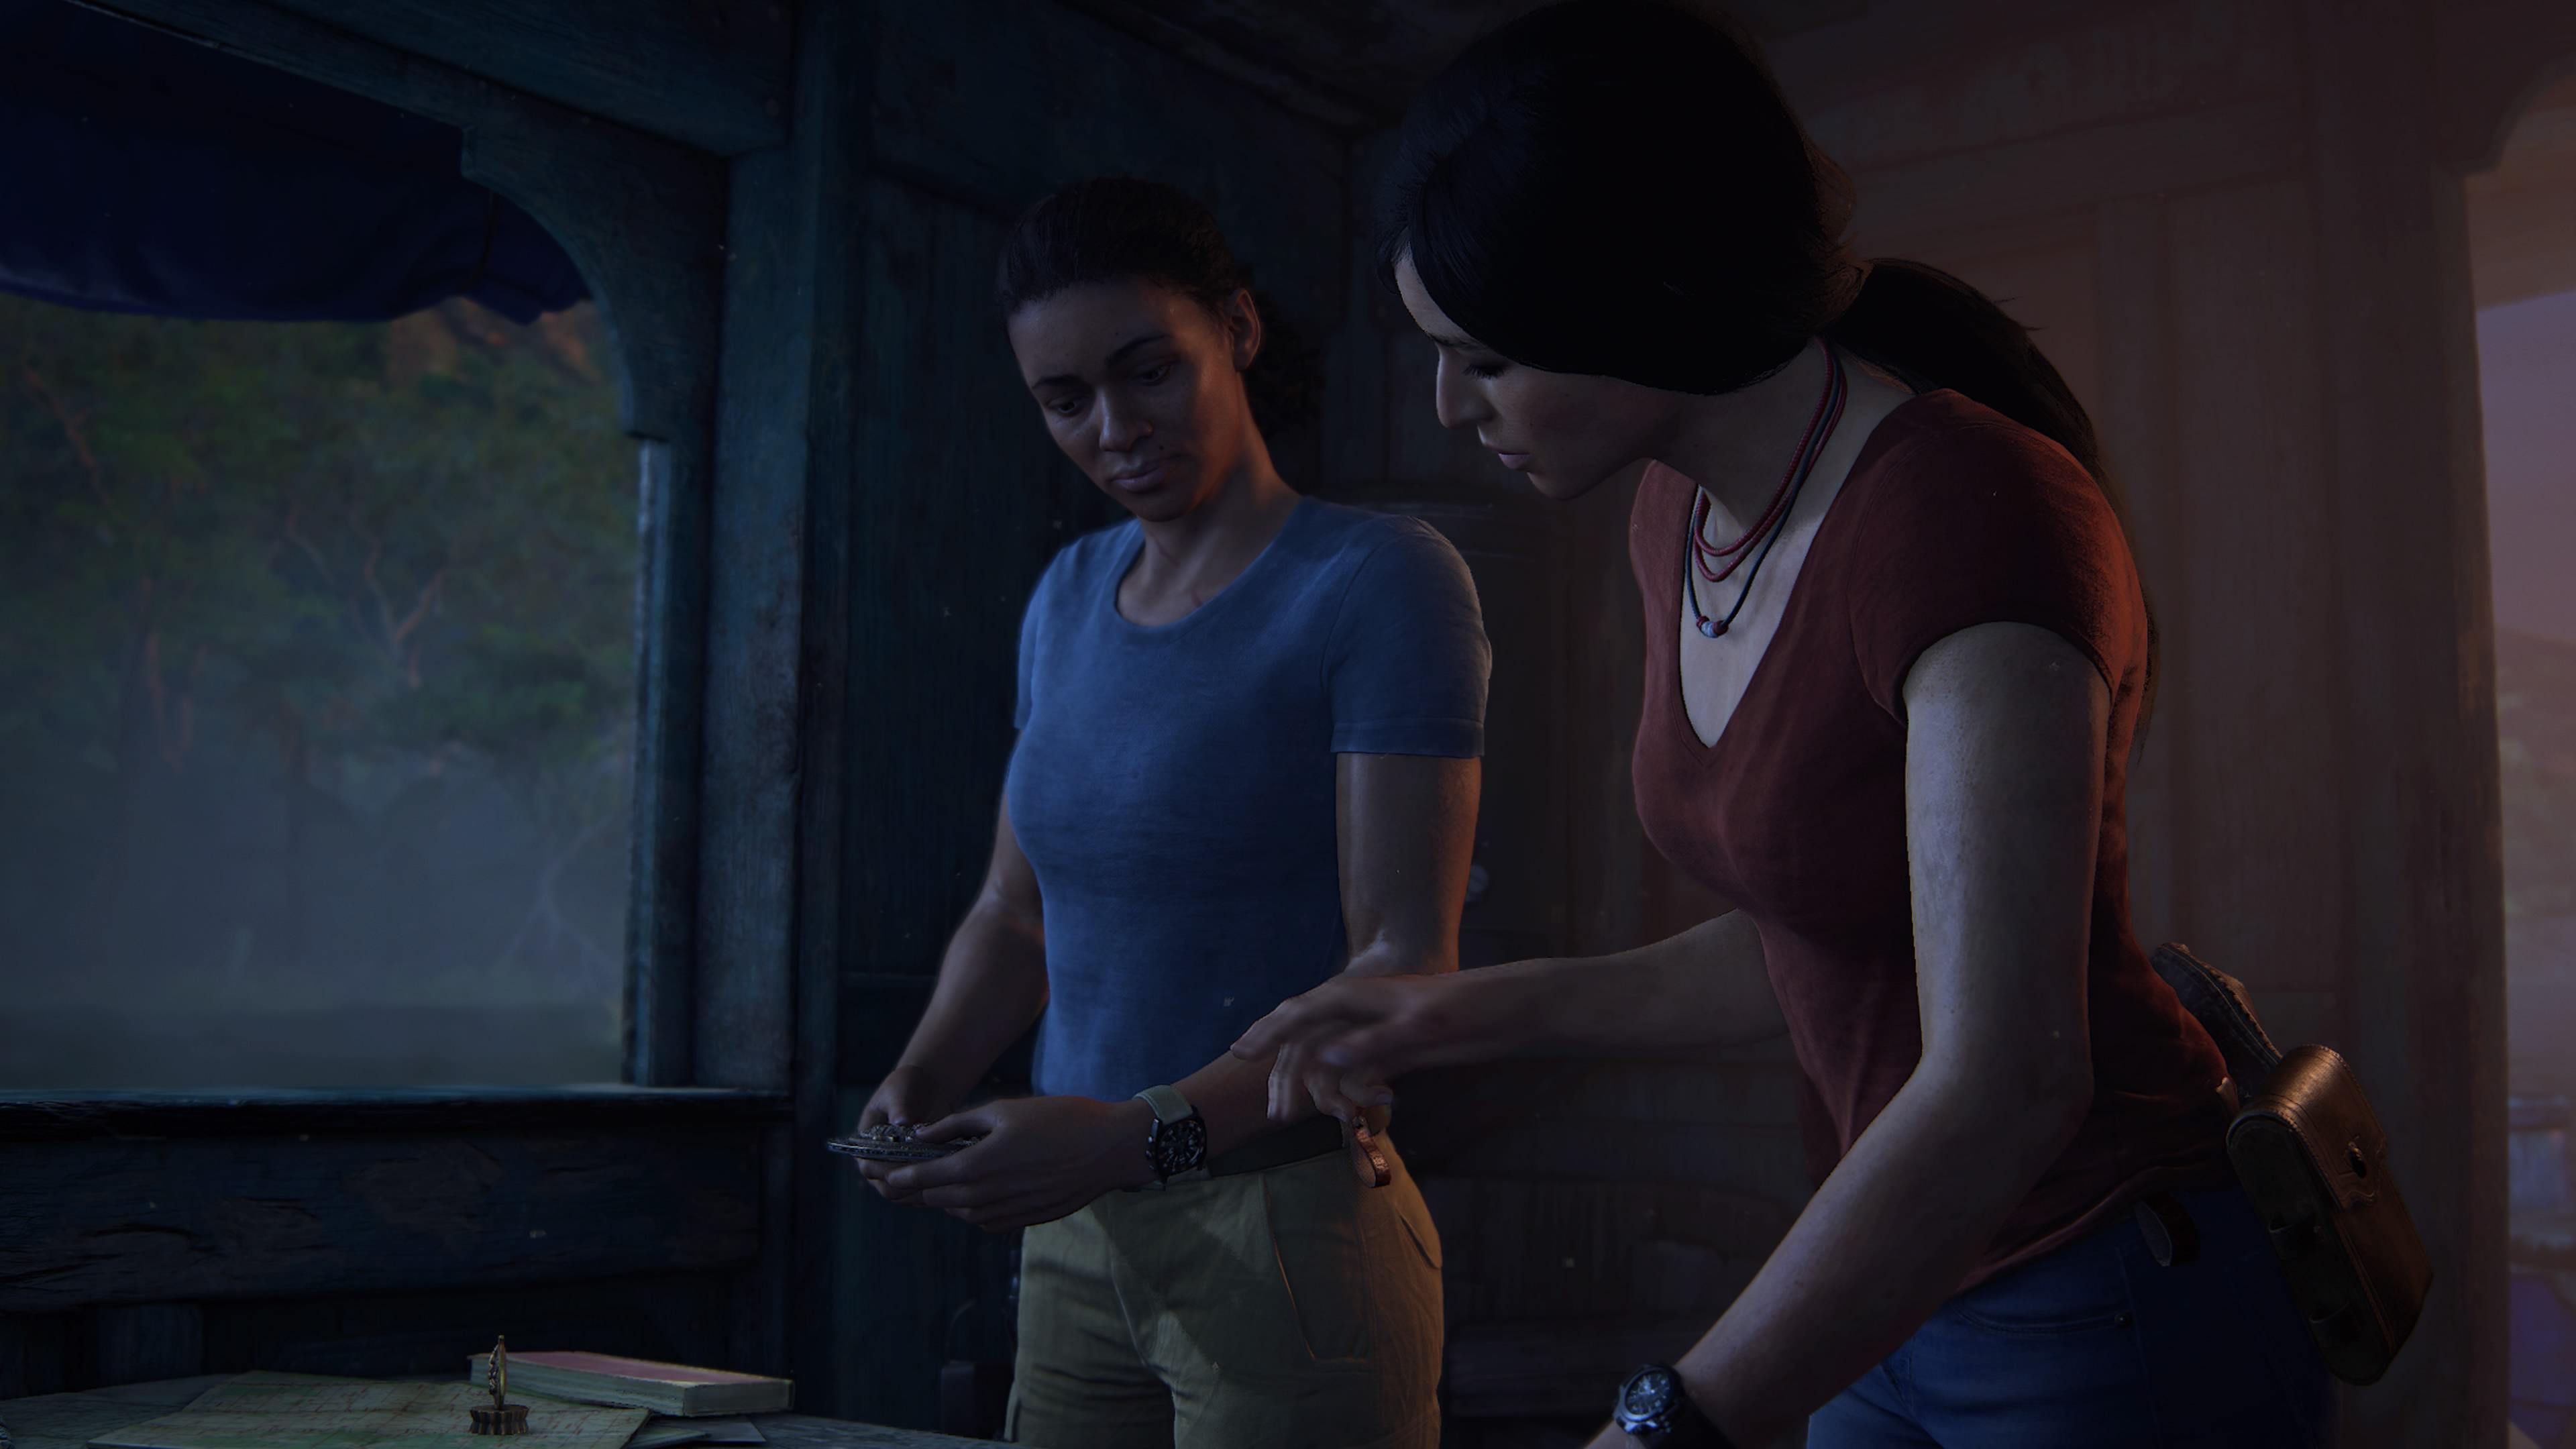 Lives de. Uncharted the Lost Legacy Хлоя и Елена. Uncharted Lost Legacy Хлоя 18. Uncharted the Lost Legacy Хлоя попка. Анчартед the Lost Legacy голая Хлоя.